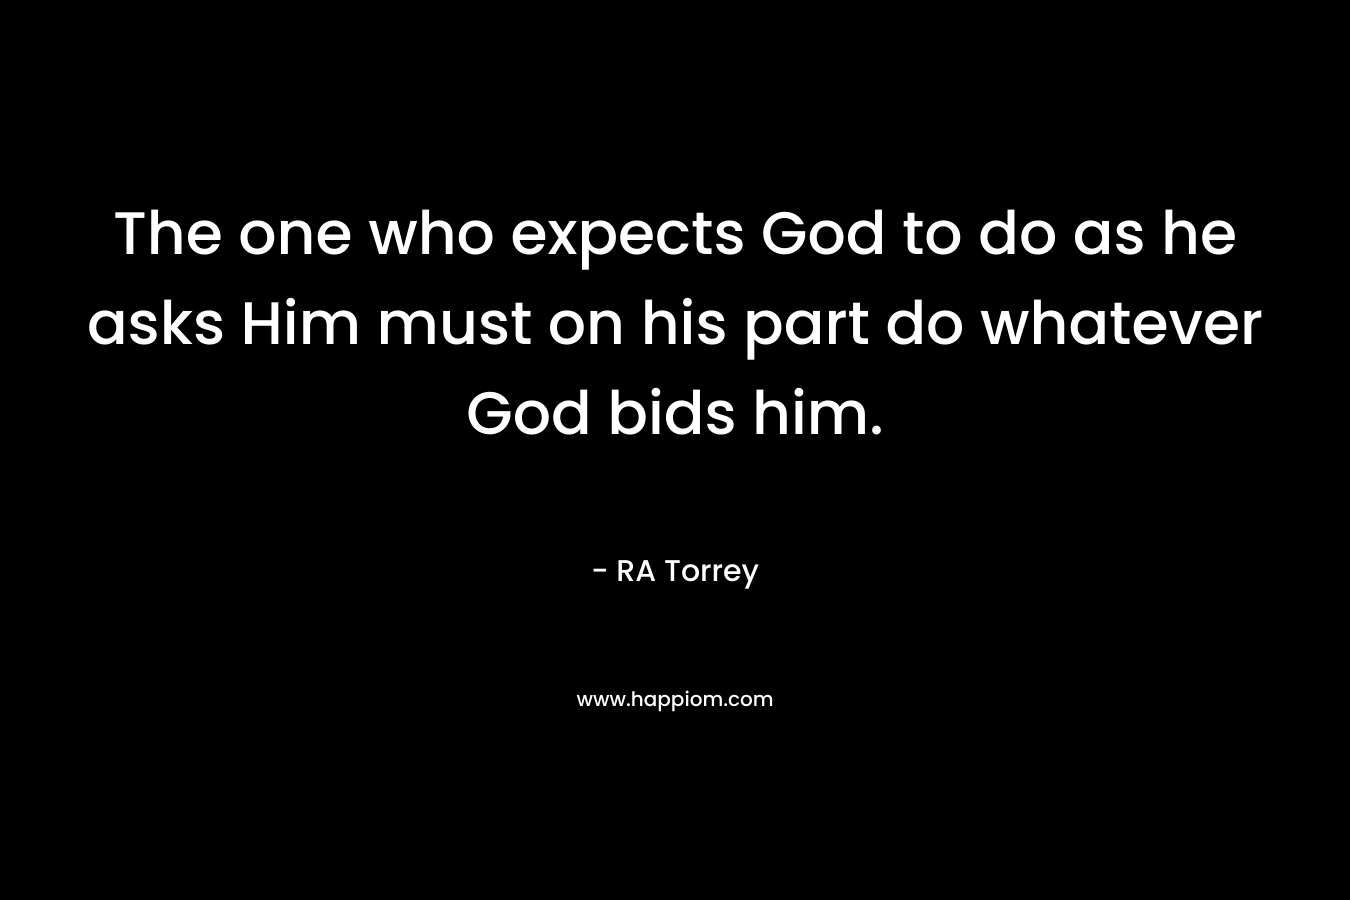 The one who expects God to do as he asks Him must on his part do whatever God bids him. – RA Torrey